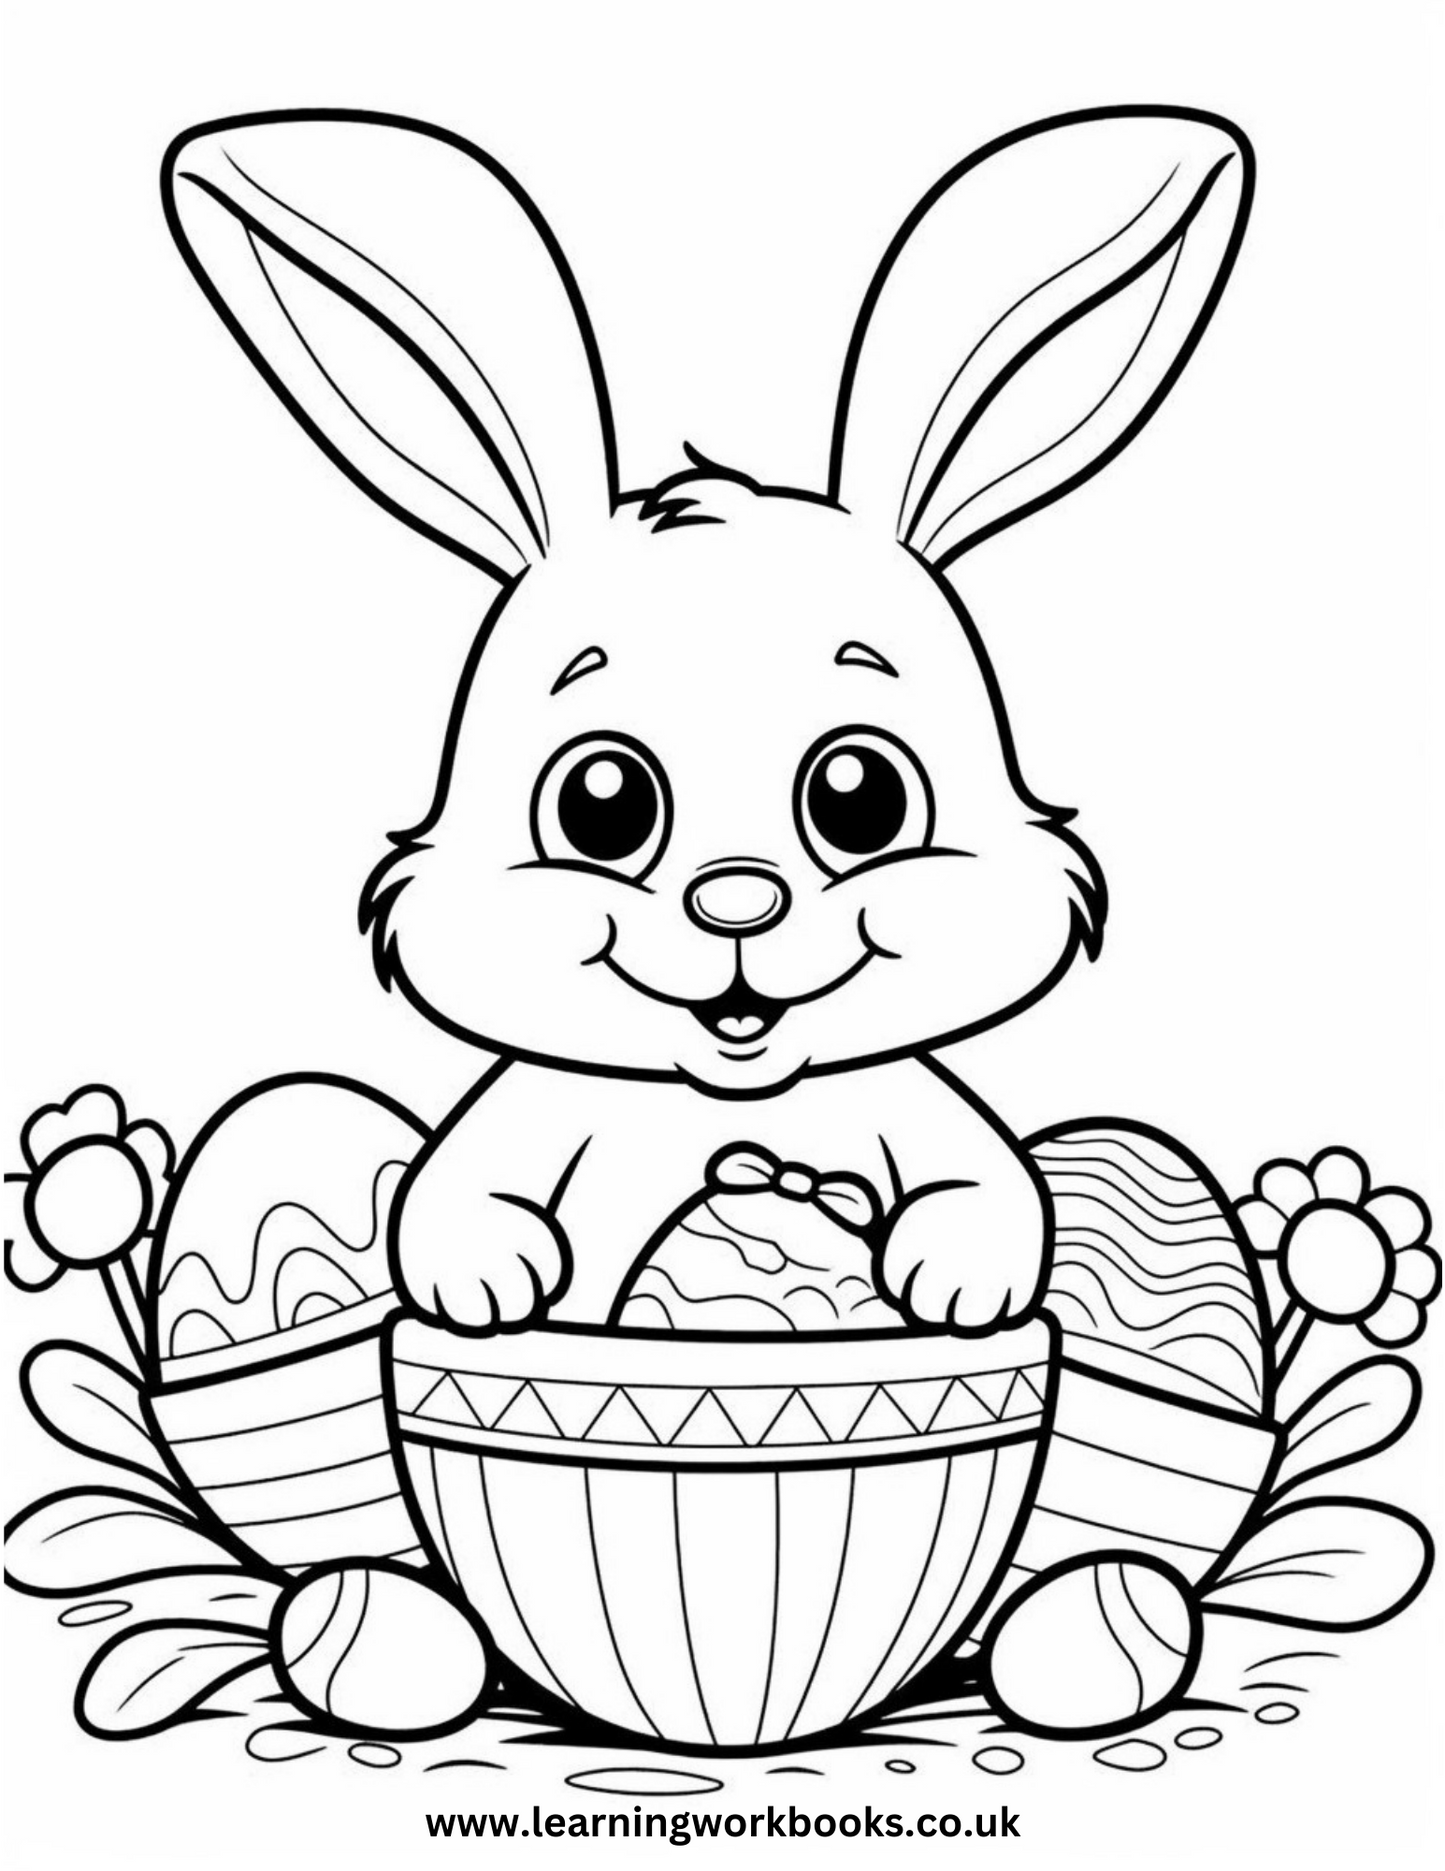 My Easter Colouring Book 1